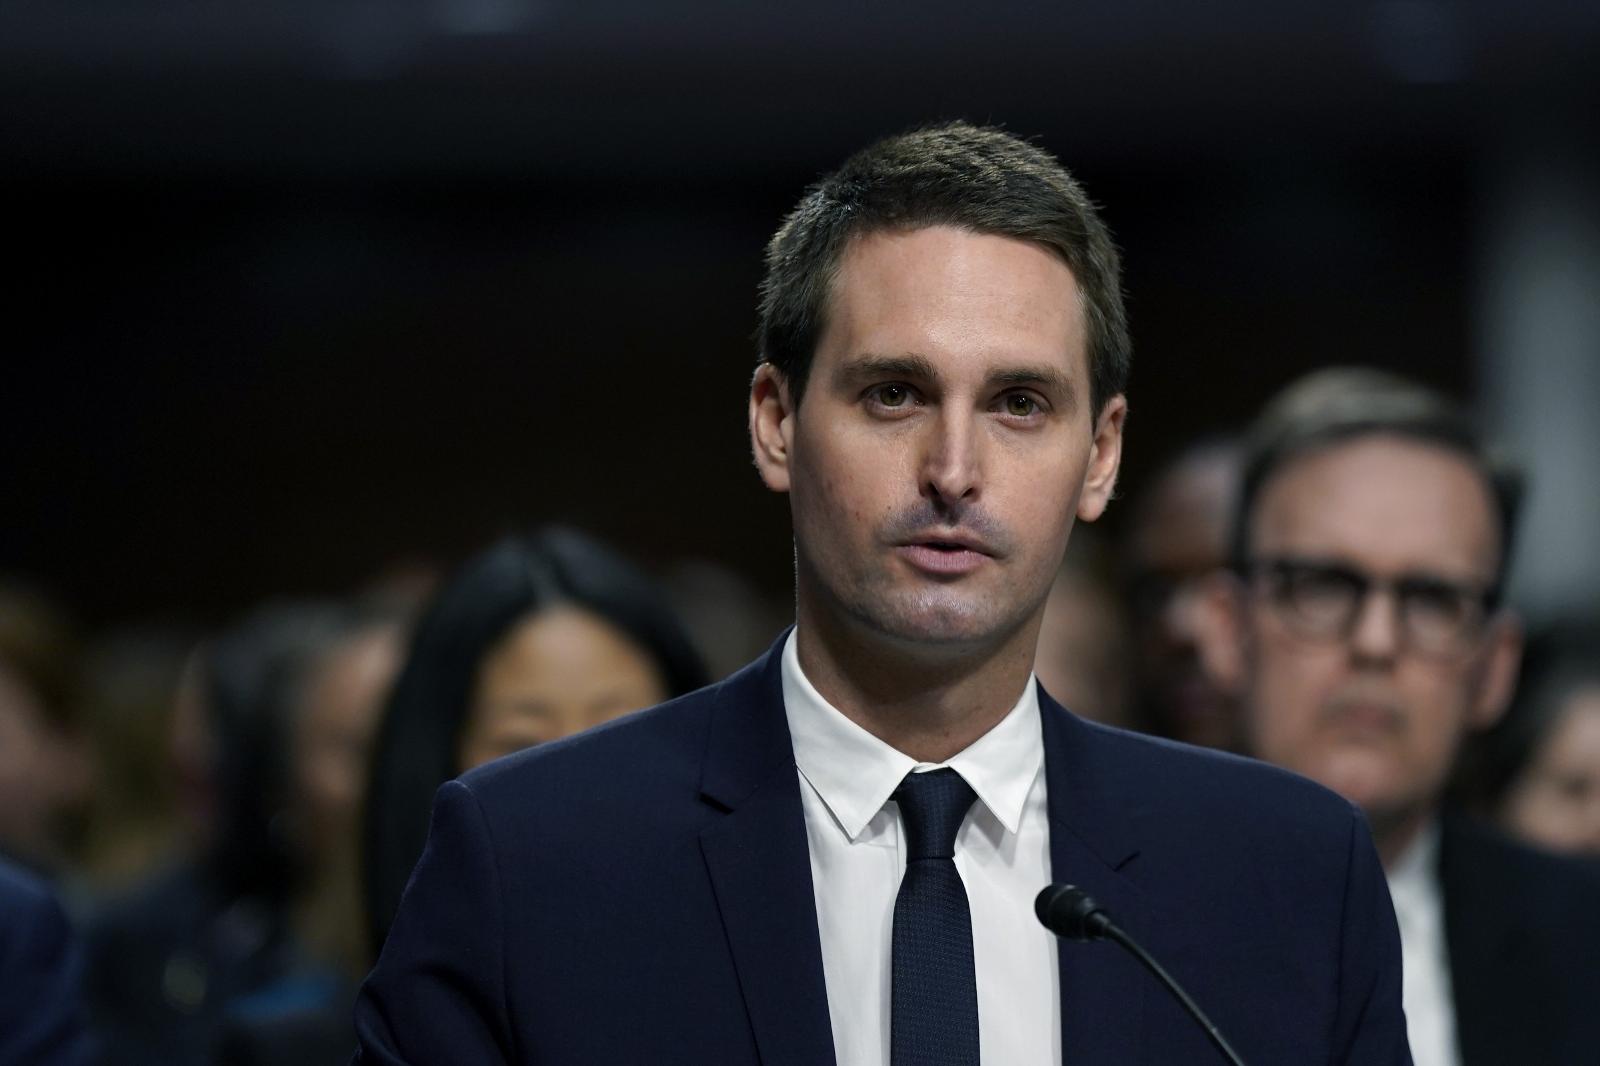 Snap CEO says 20 million US teens use Snapchat, but only 200,000 parents use its Family Center controls